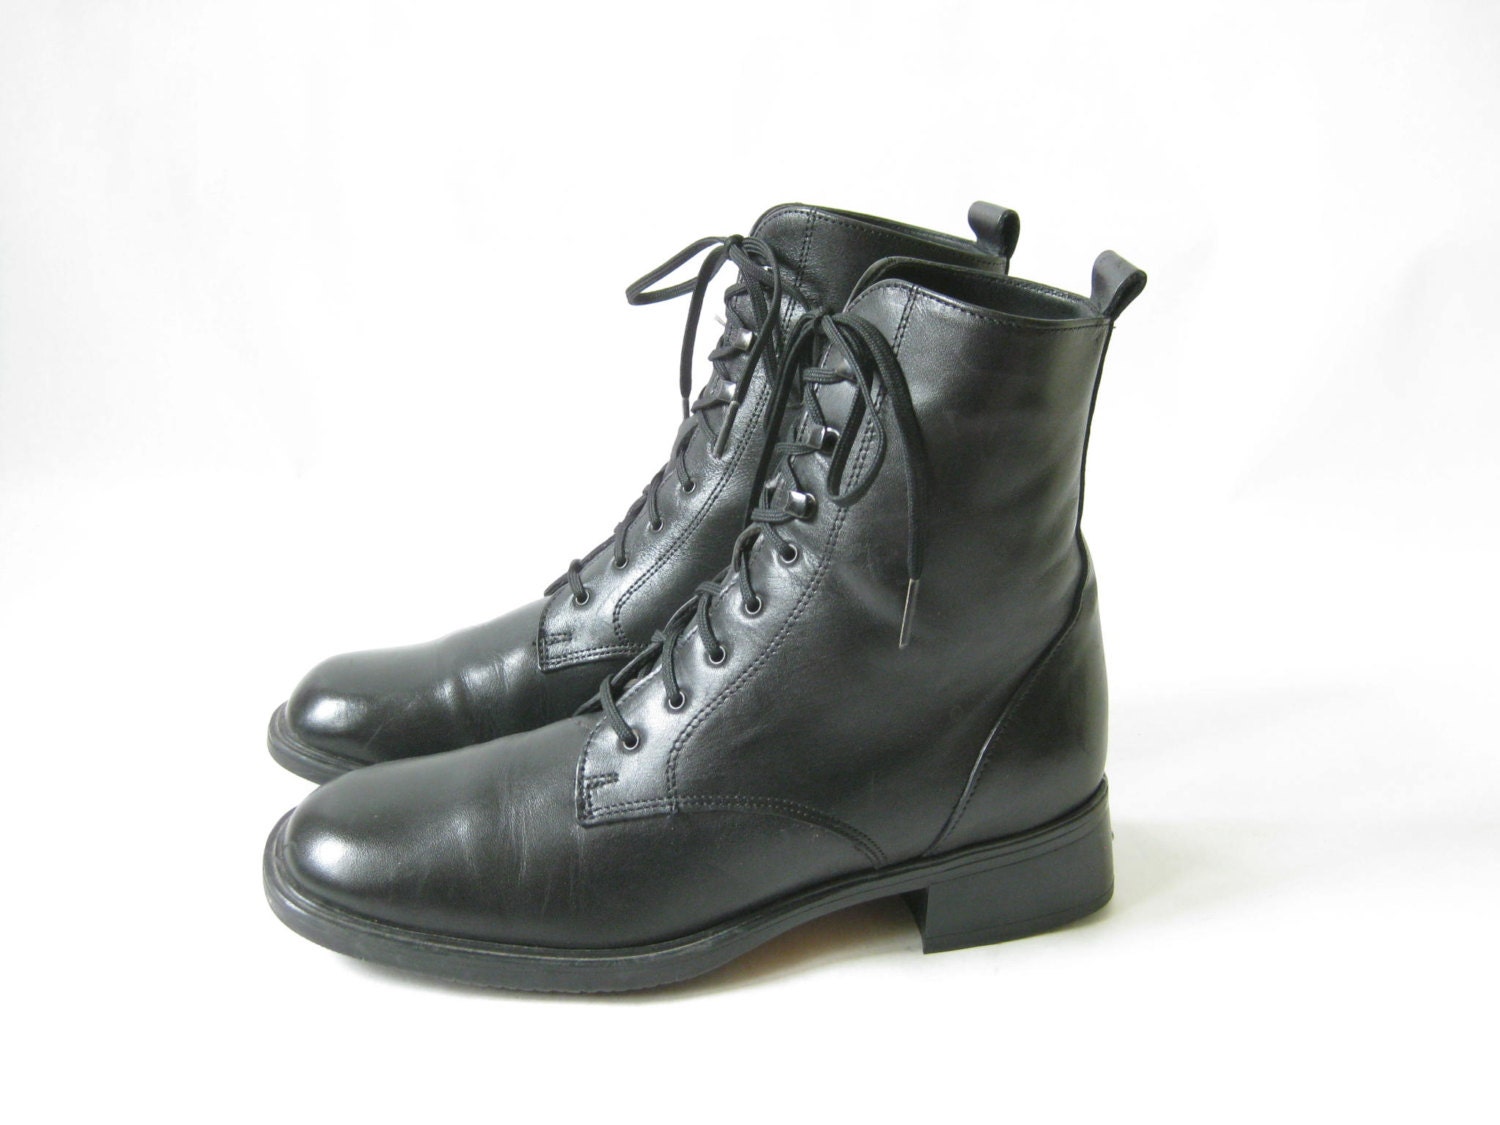 Vintage Black Leather Lace Up Ankle Boots. Size by TimeBombVintage